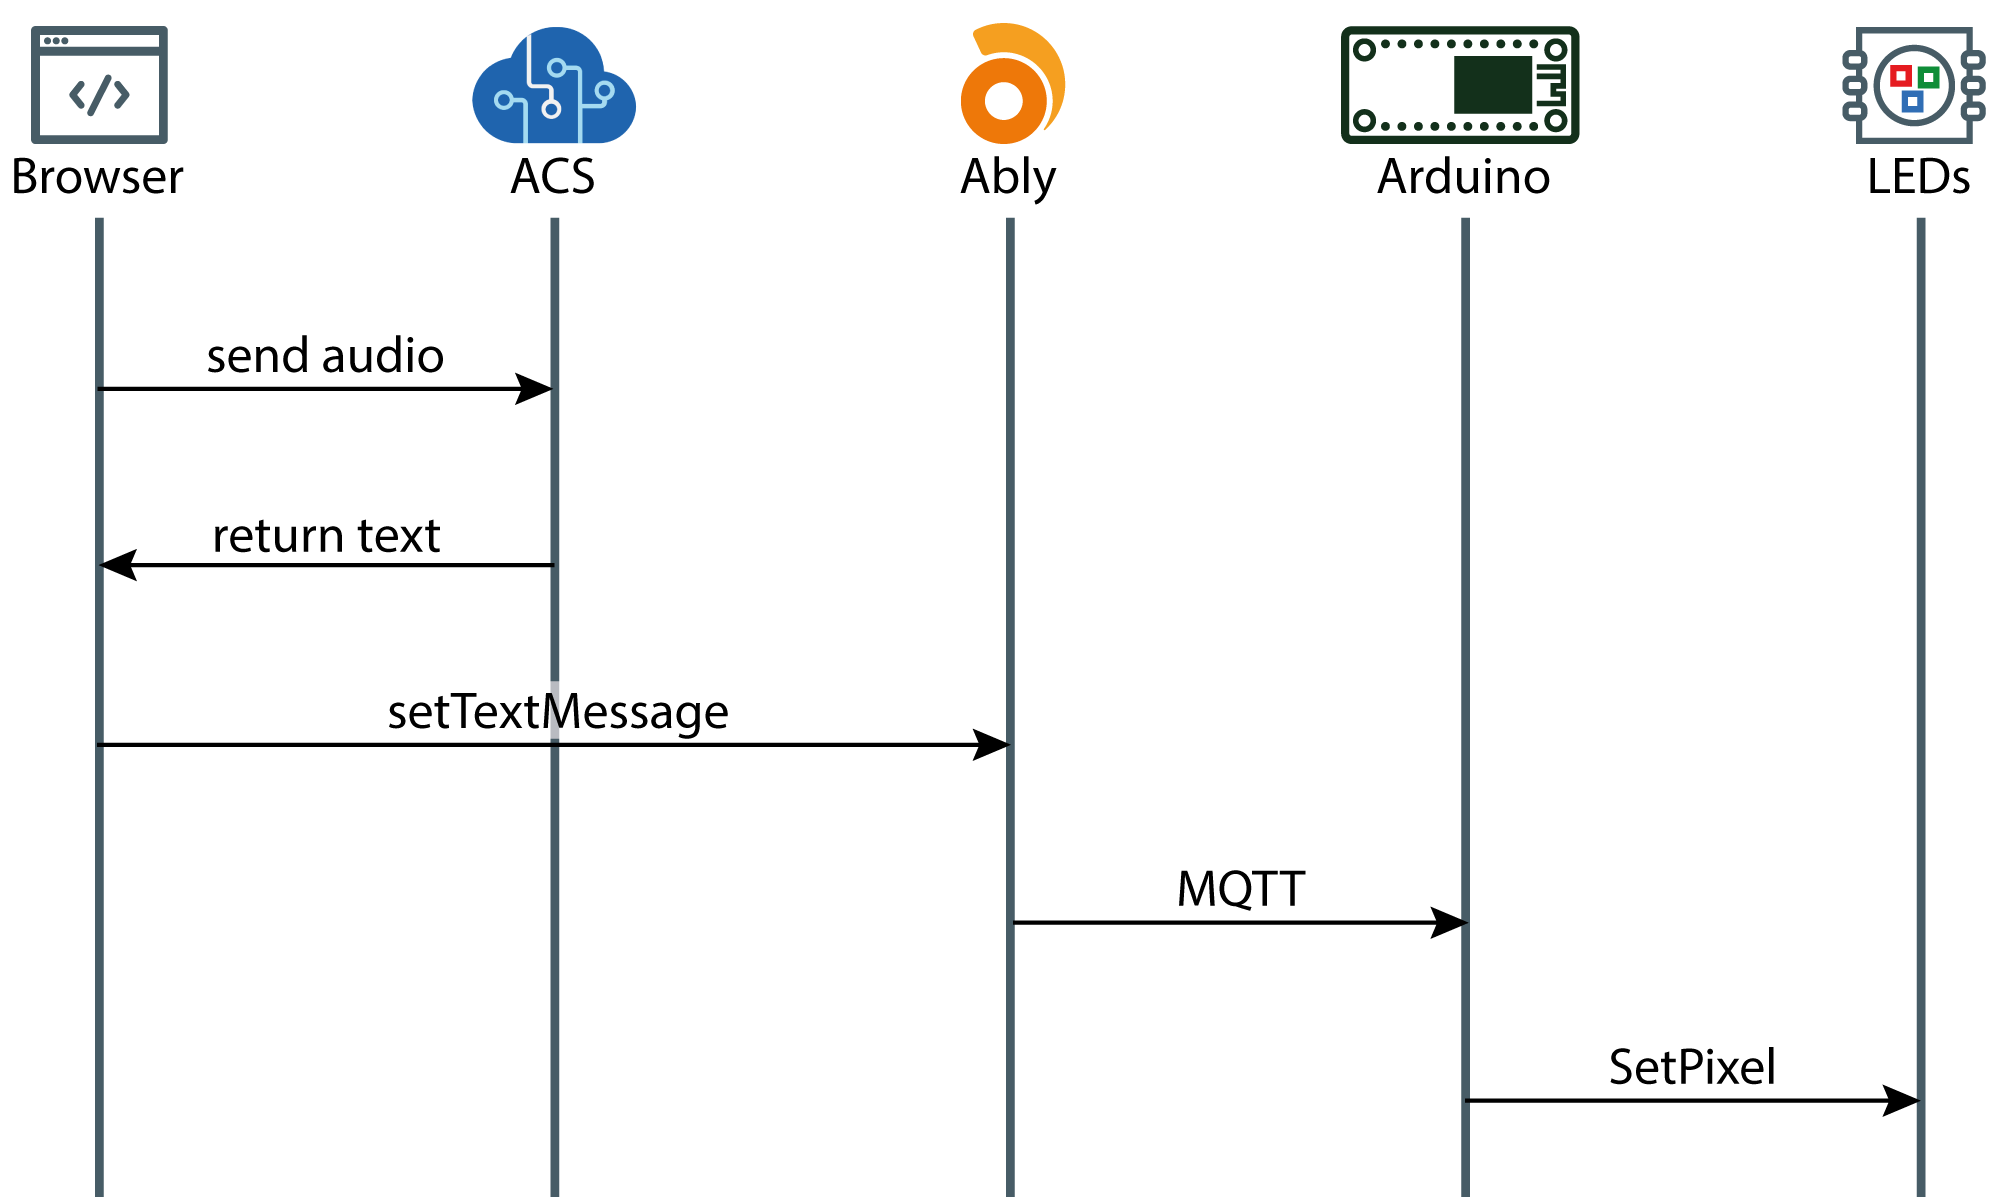 A sequence diagram of the app and hardware